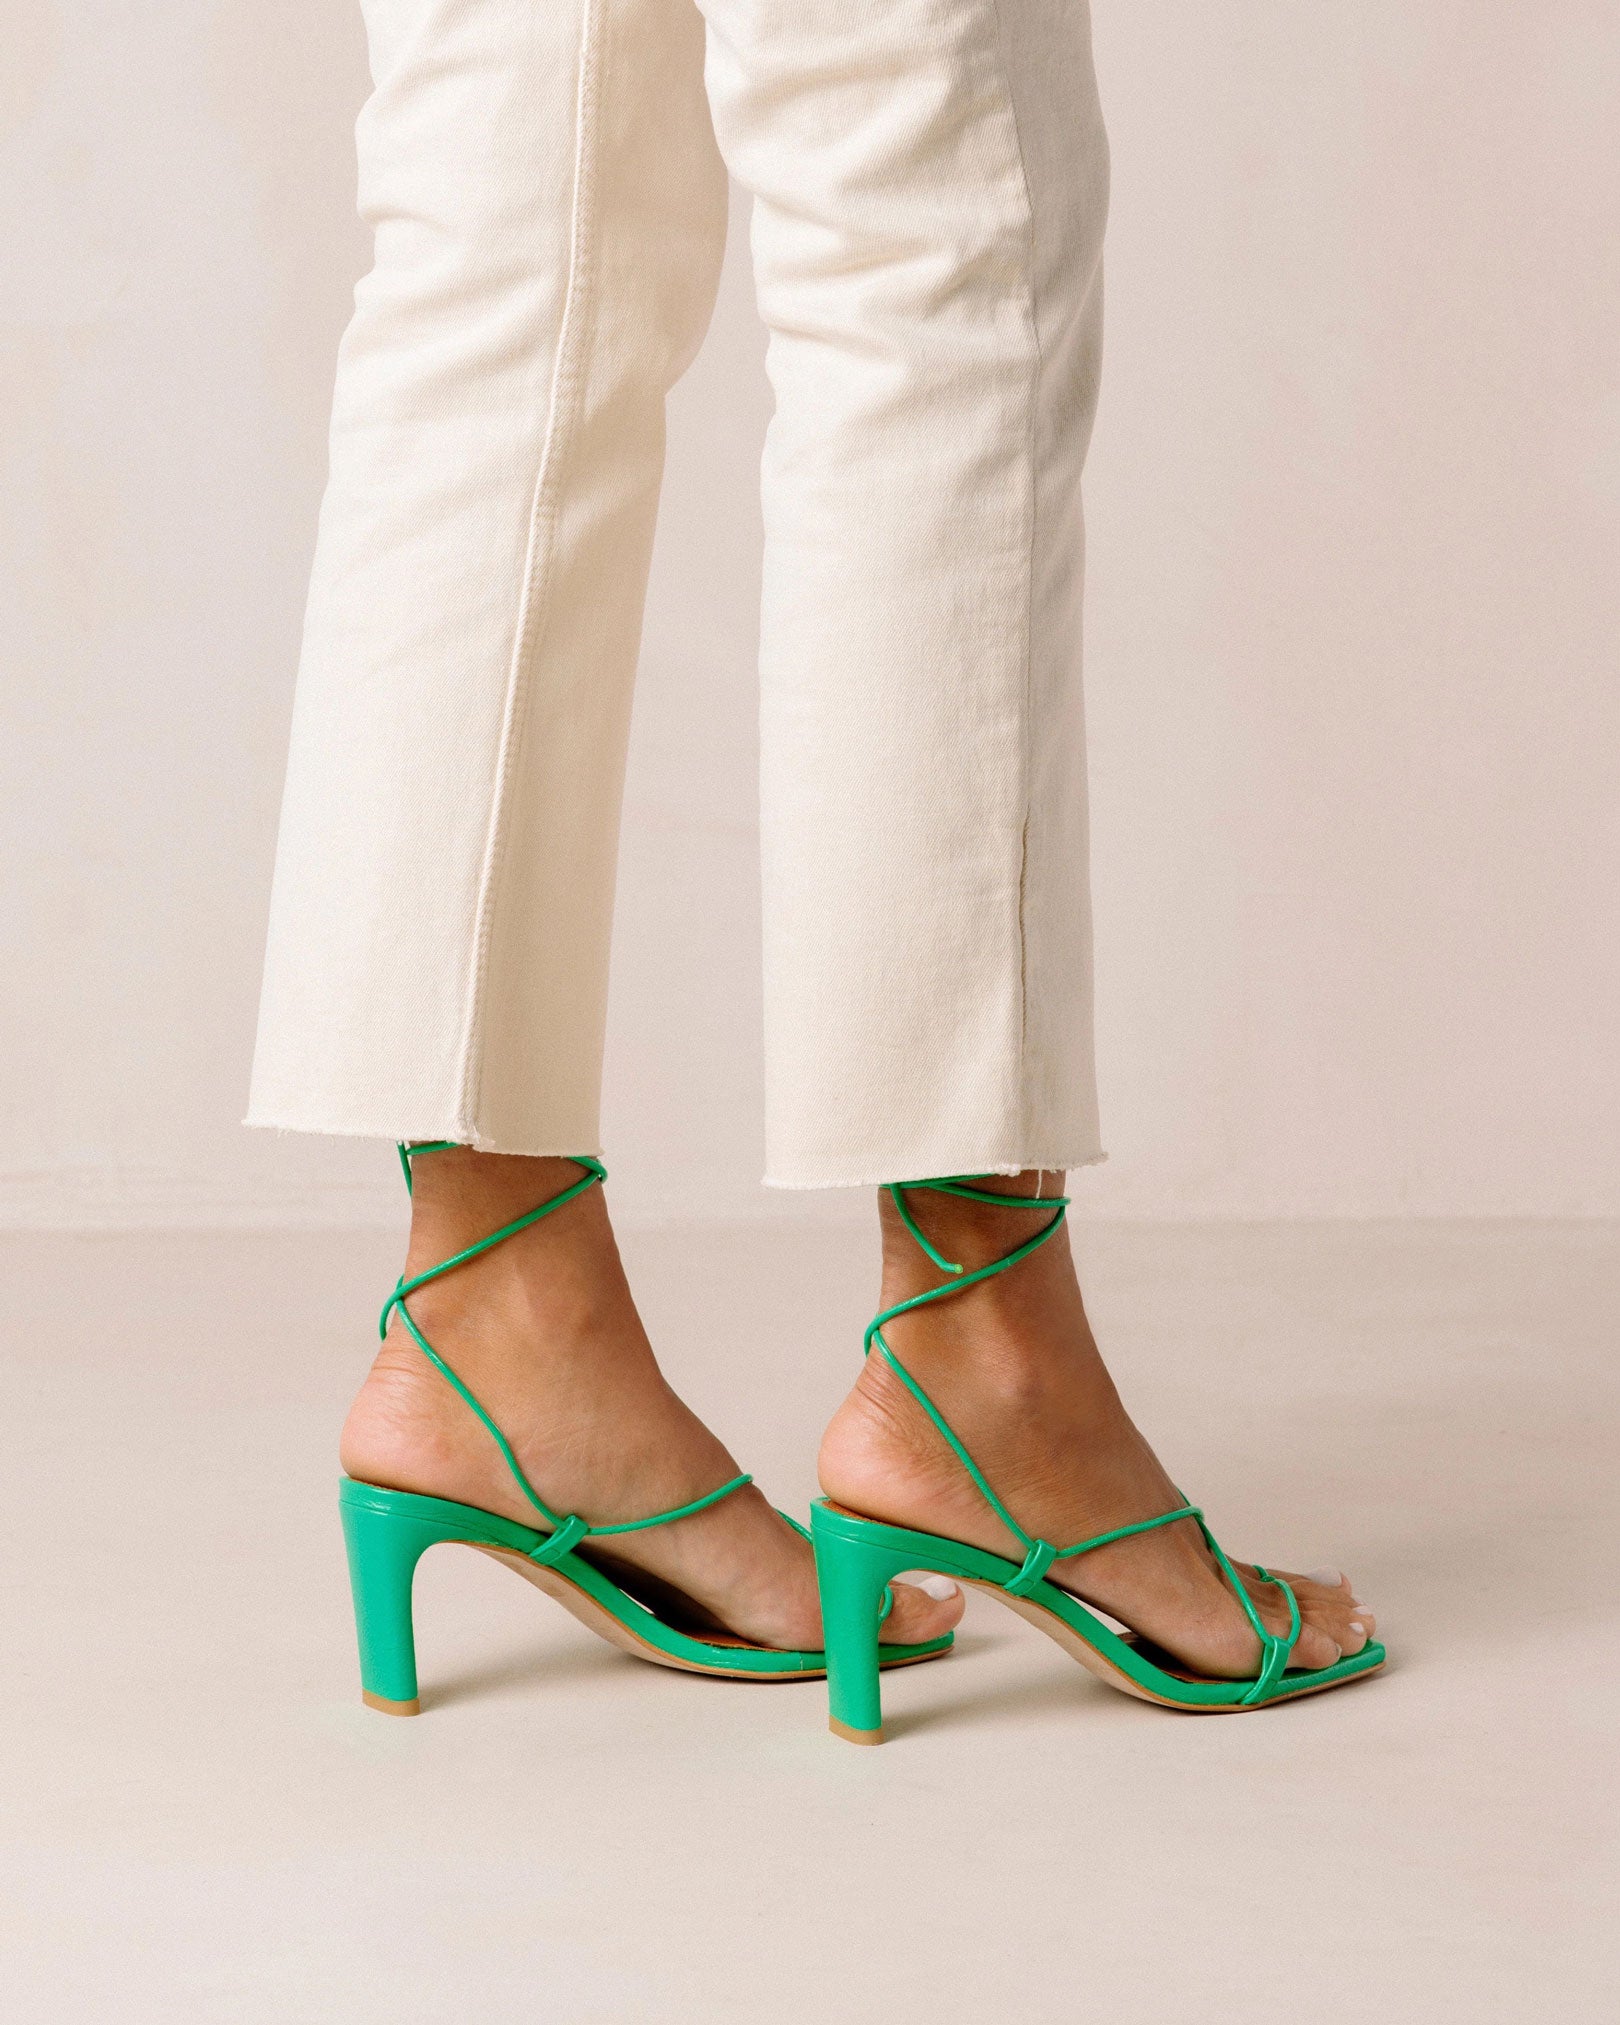 ALOHAS Bellini Sandal in Neon Green available at Lahn.shop